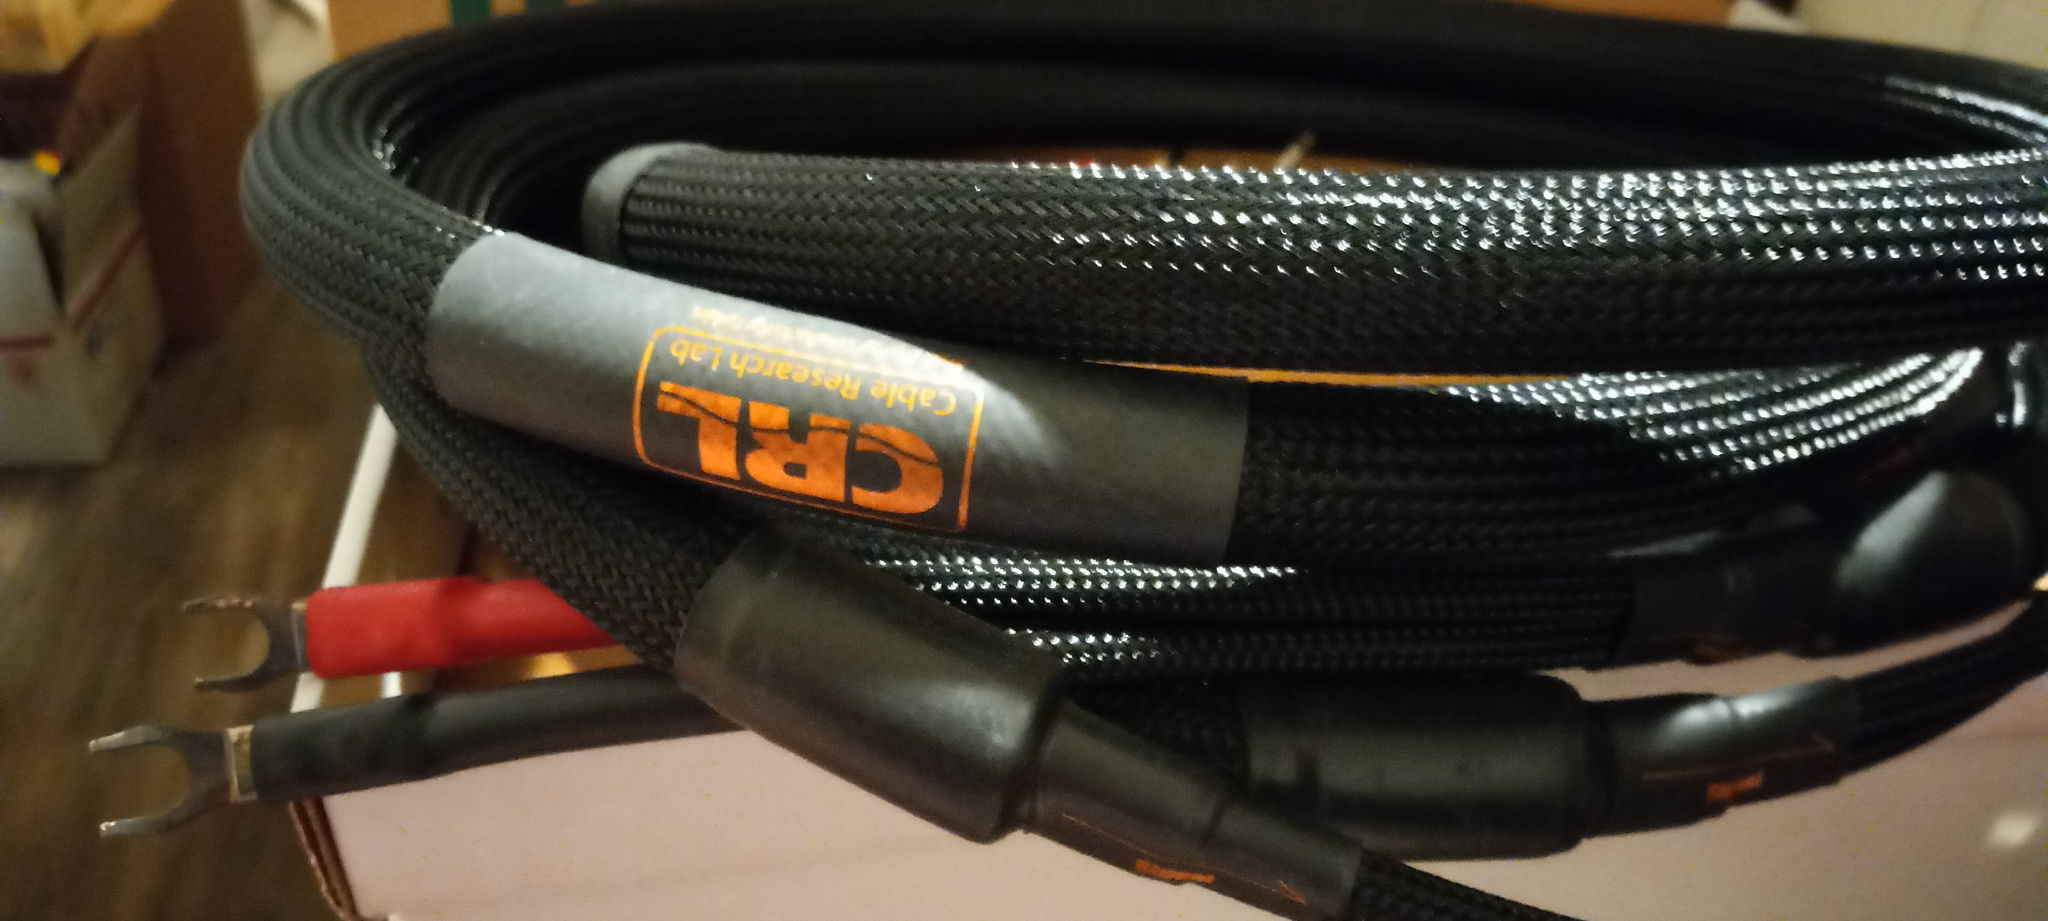 CRL (Cable Research Lab) Copper Series Speaker Cables $899 5